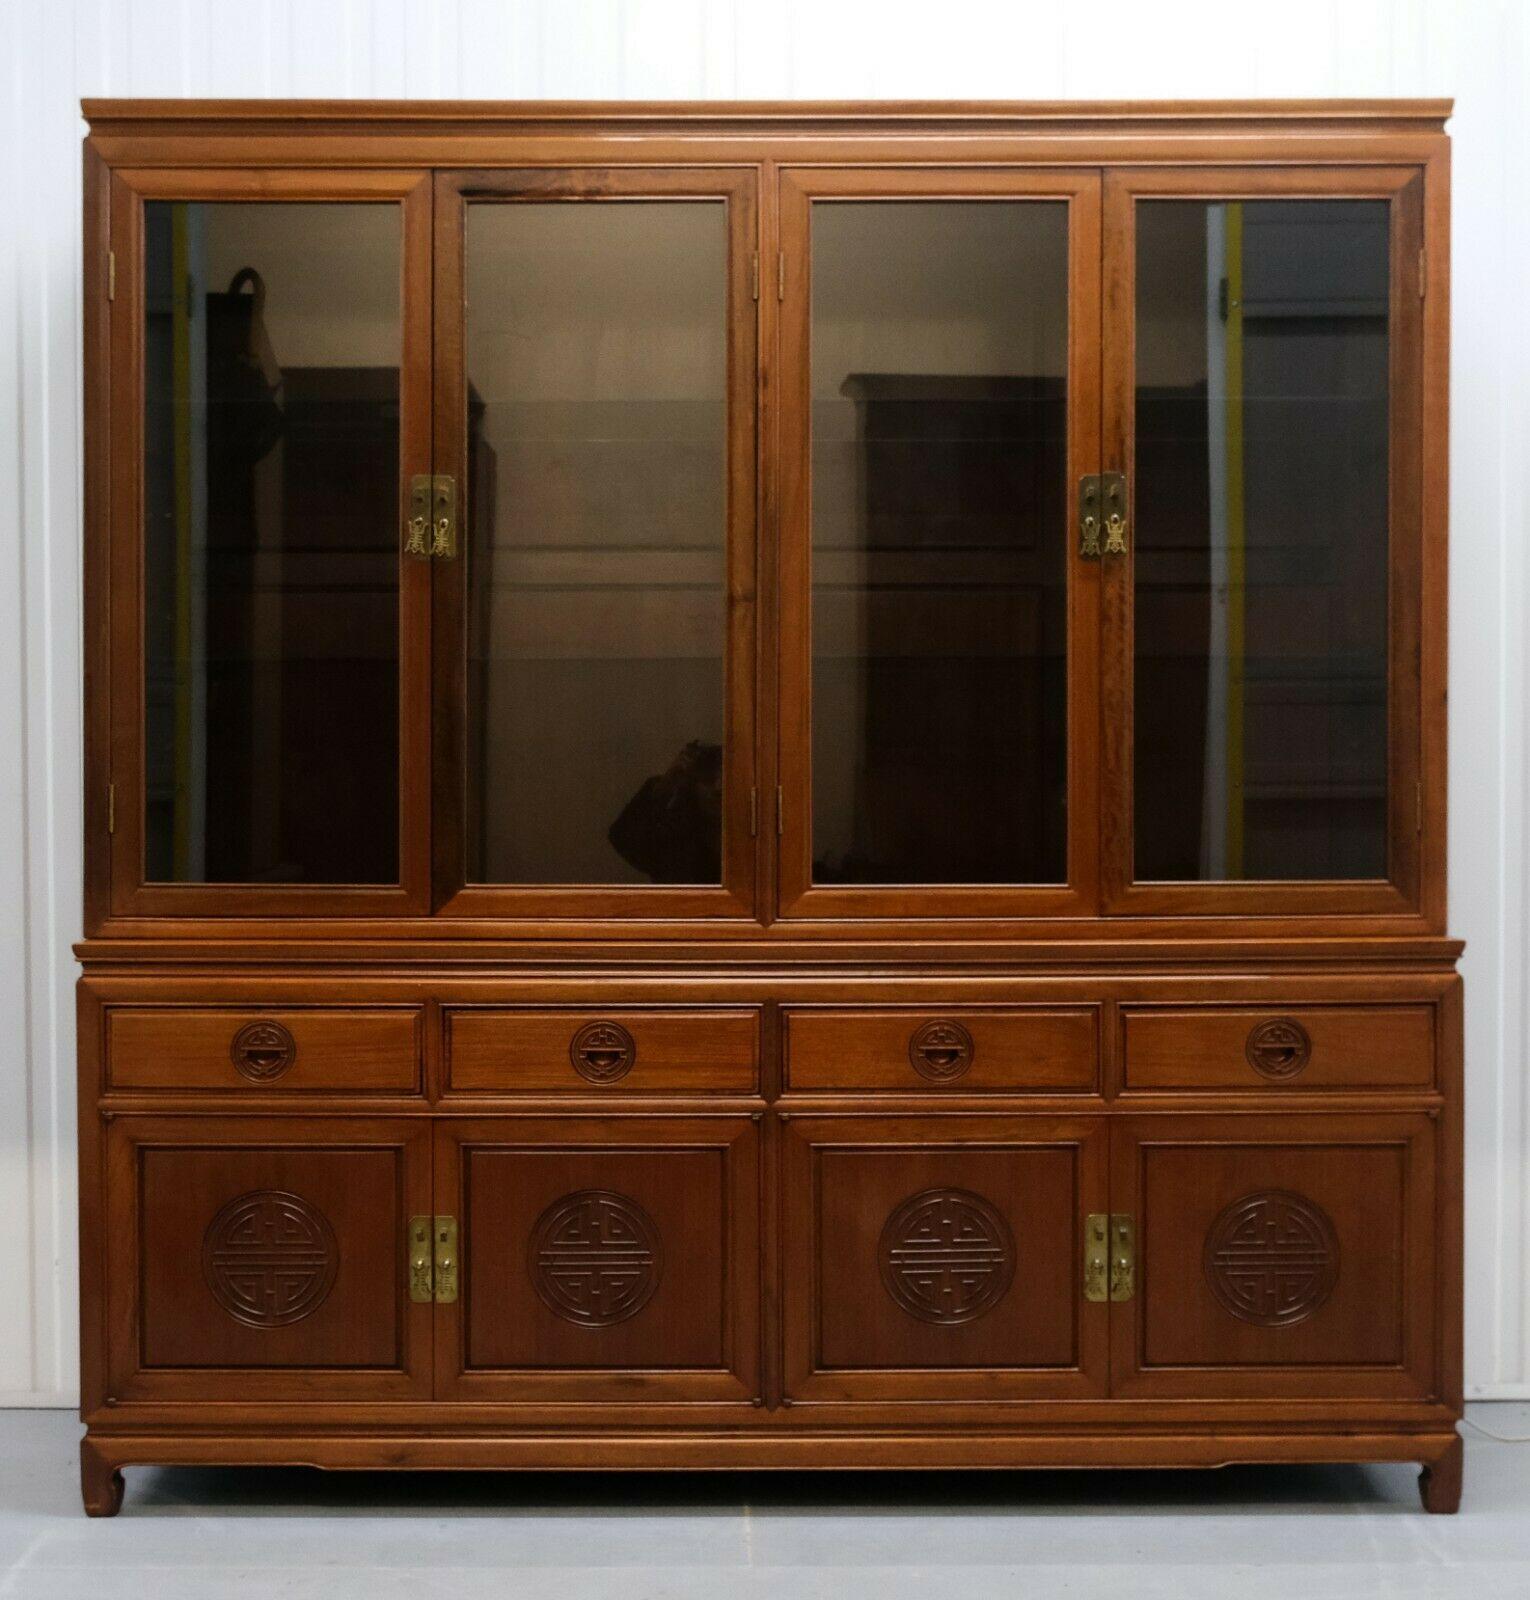 We are delighted to offer for sale this stunning and solid hardwood Chinese cupboard/cabinet with lights.

This sturdy and solid cabinet has adjustable glass shelves on top and brass handles on the doors. Each carved panel was hand-made with long